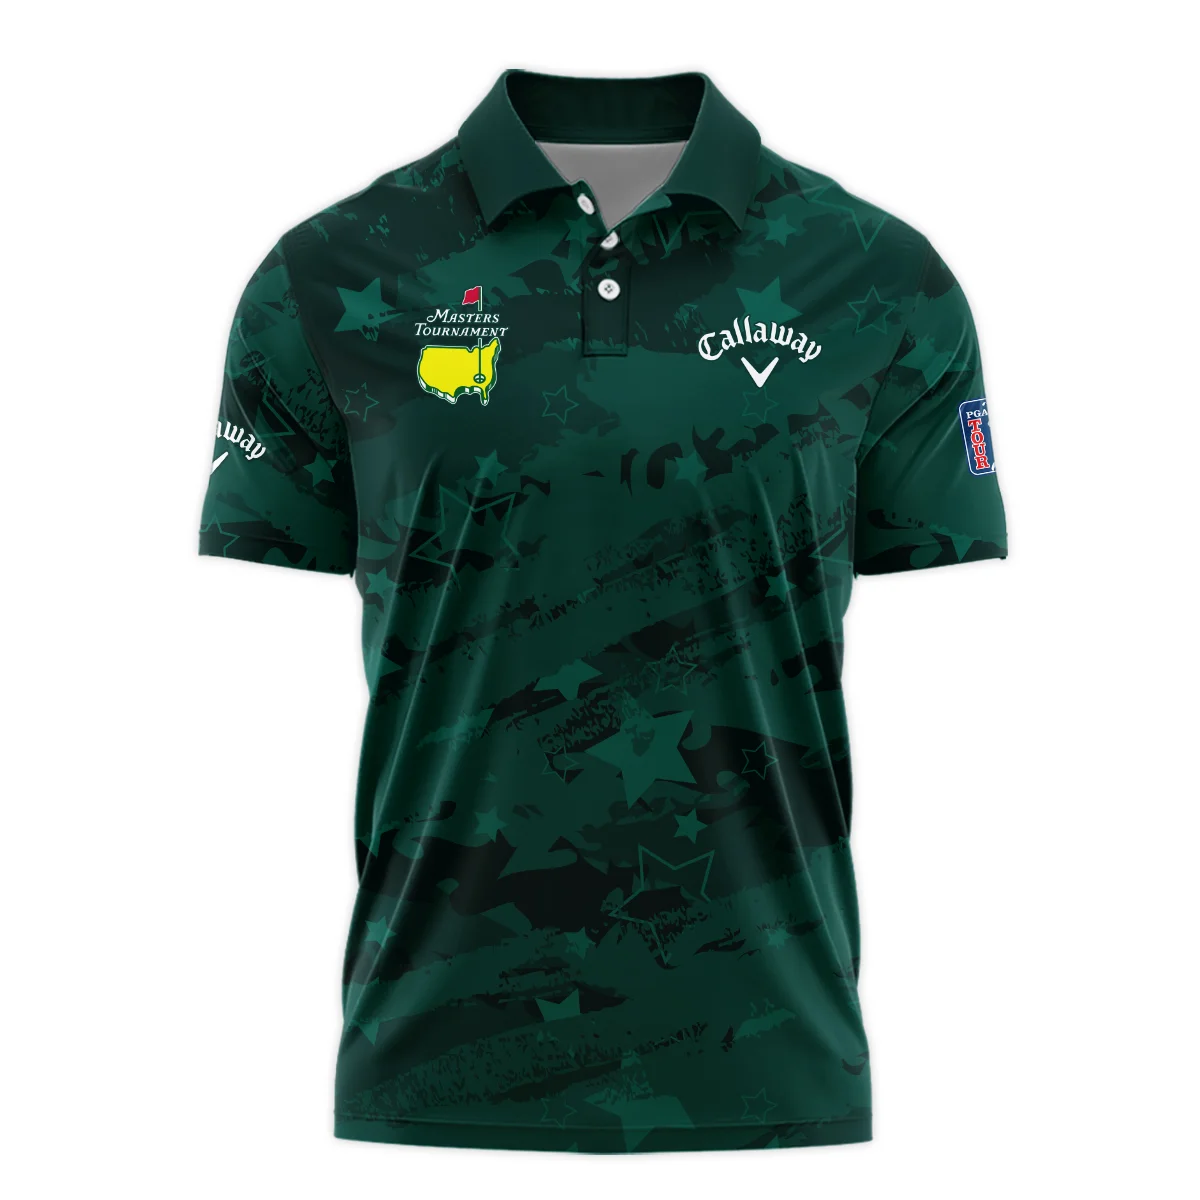 Dark Green Stars Pattern Grunge Background Masters Tournament Callaway Vneck Polo Shirt Style Classic Polo Shirt For Men